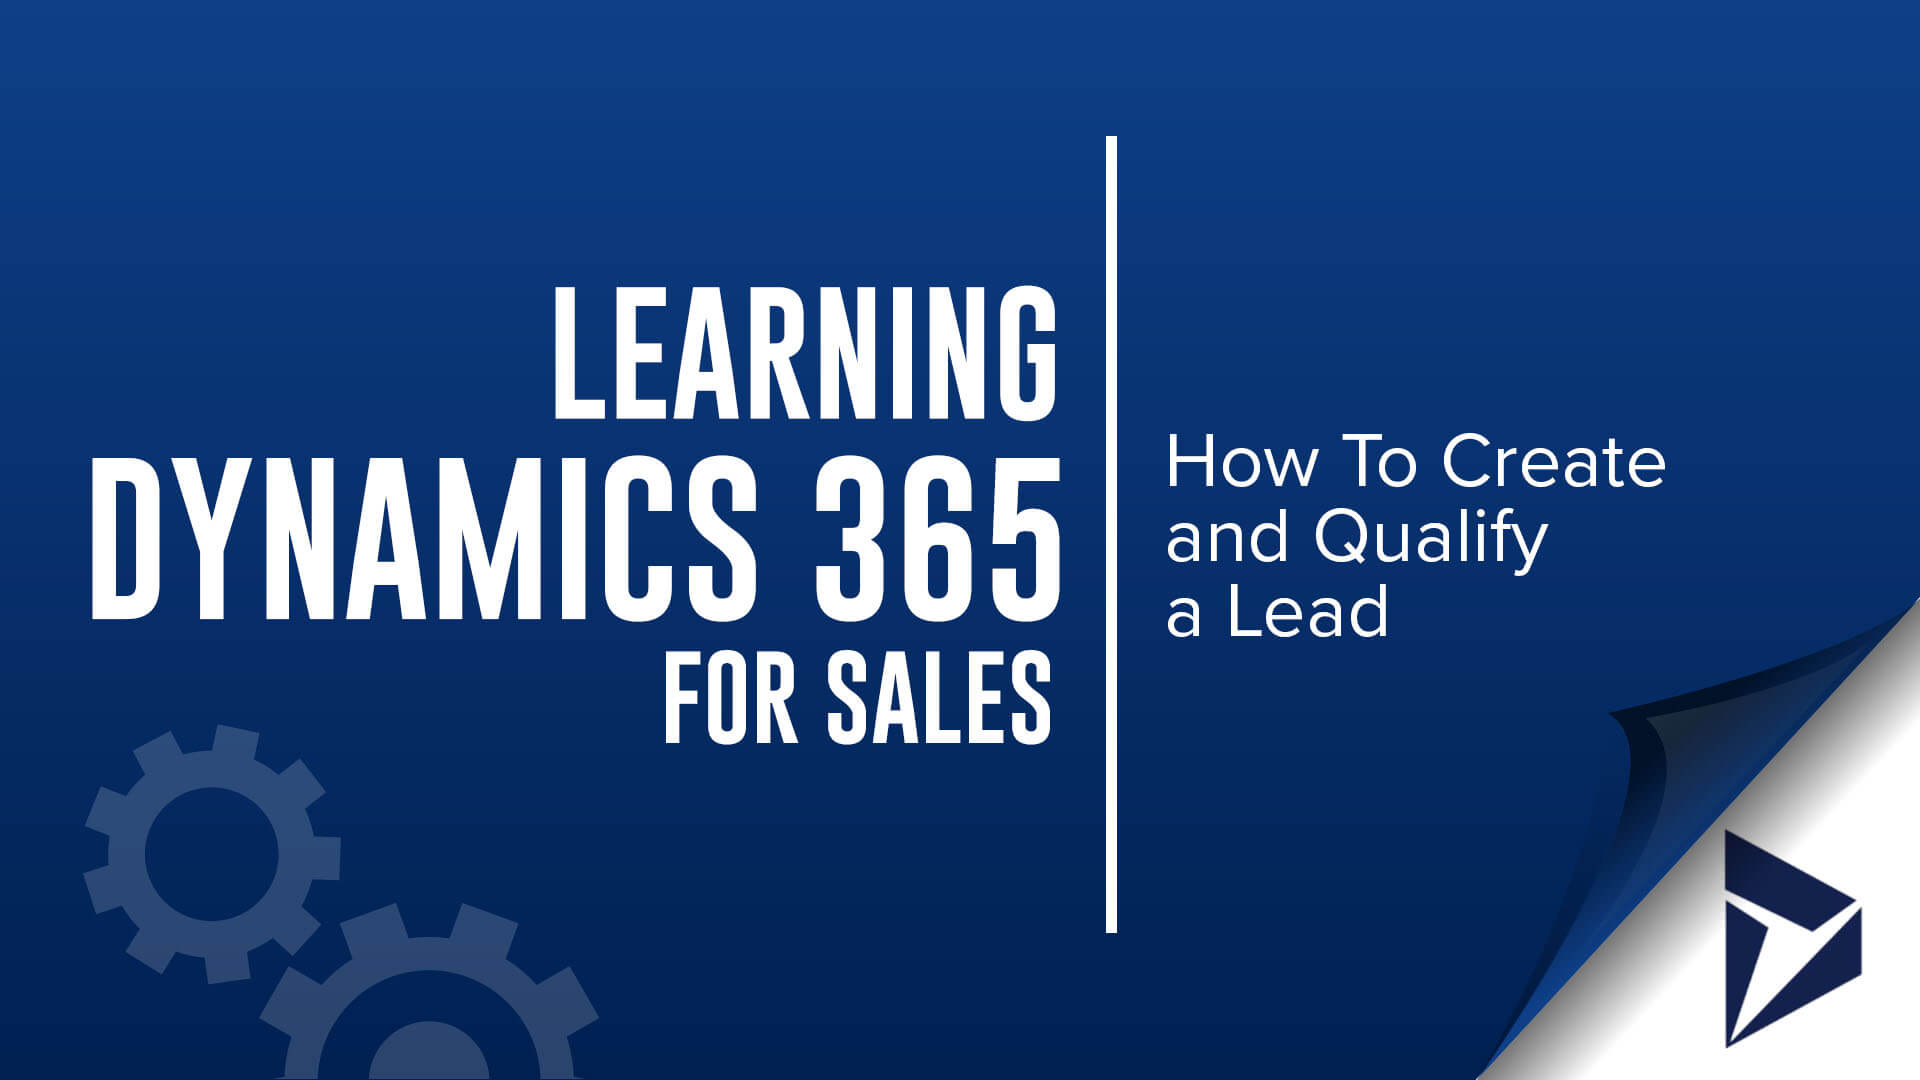 learning microsoft dynamics 365 for sales - how to create and qualify a lead